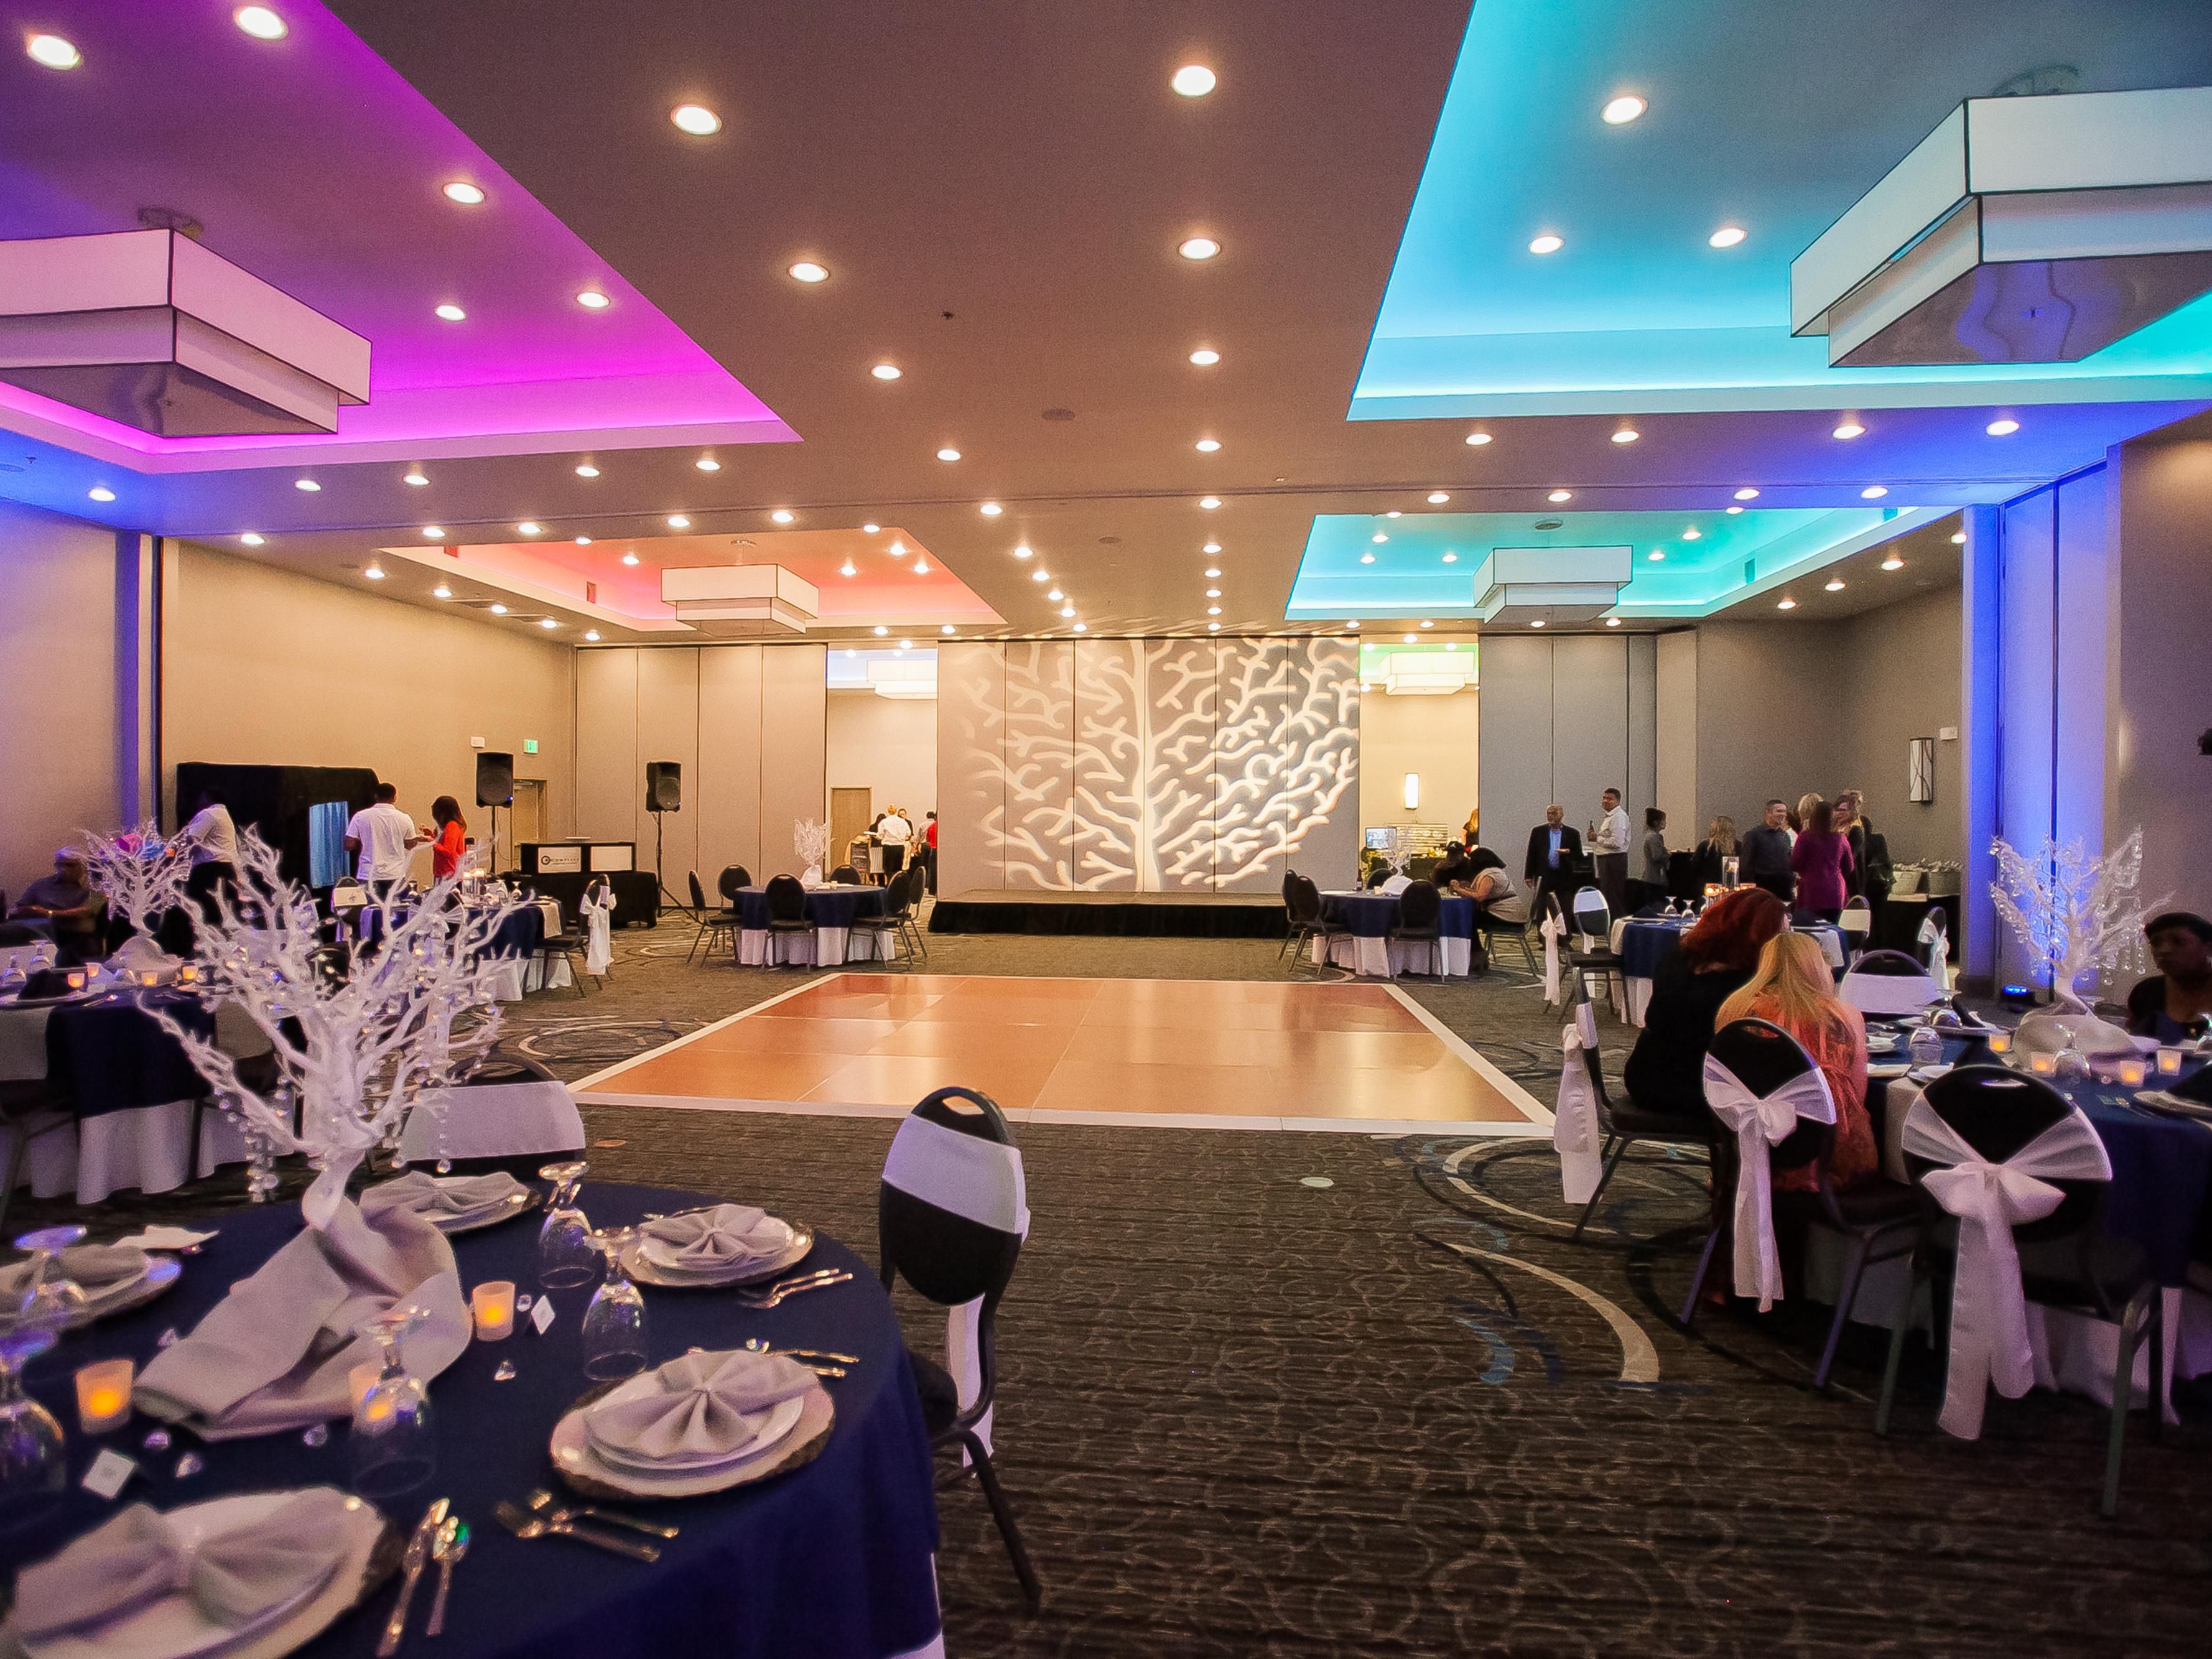 Plan the perfect wedding with our dedicated team & exclusive event space. Customize your event with stunning decor for a dream wedding made to order.
